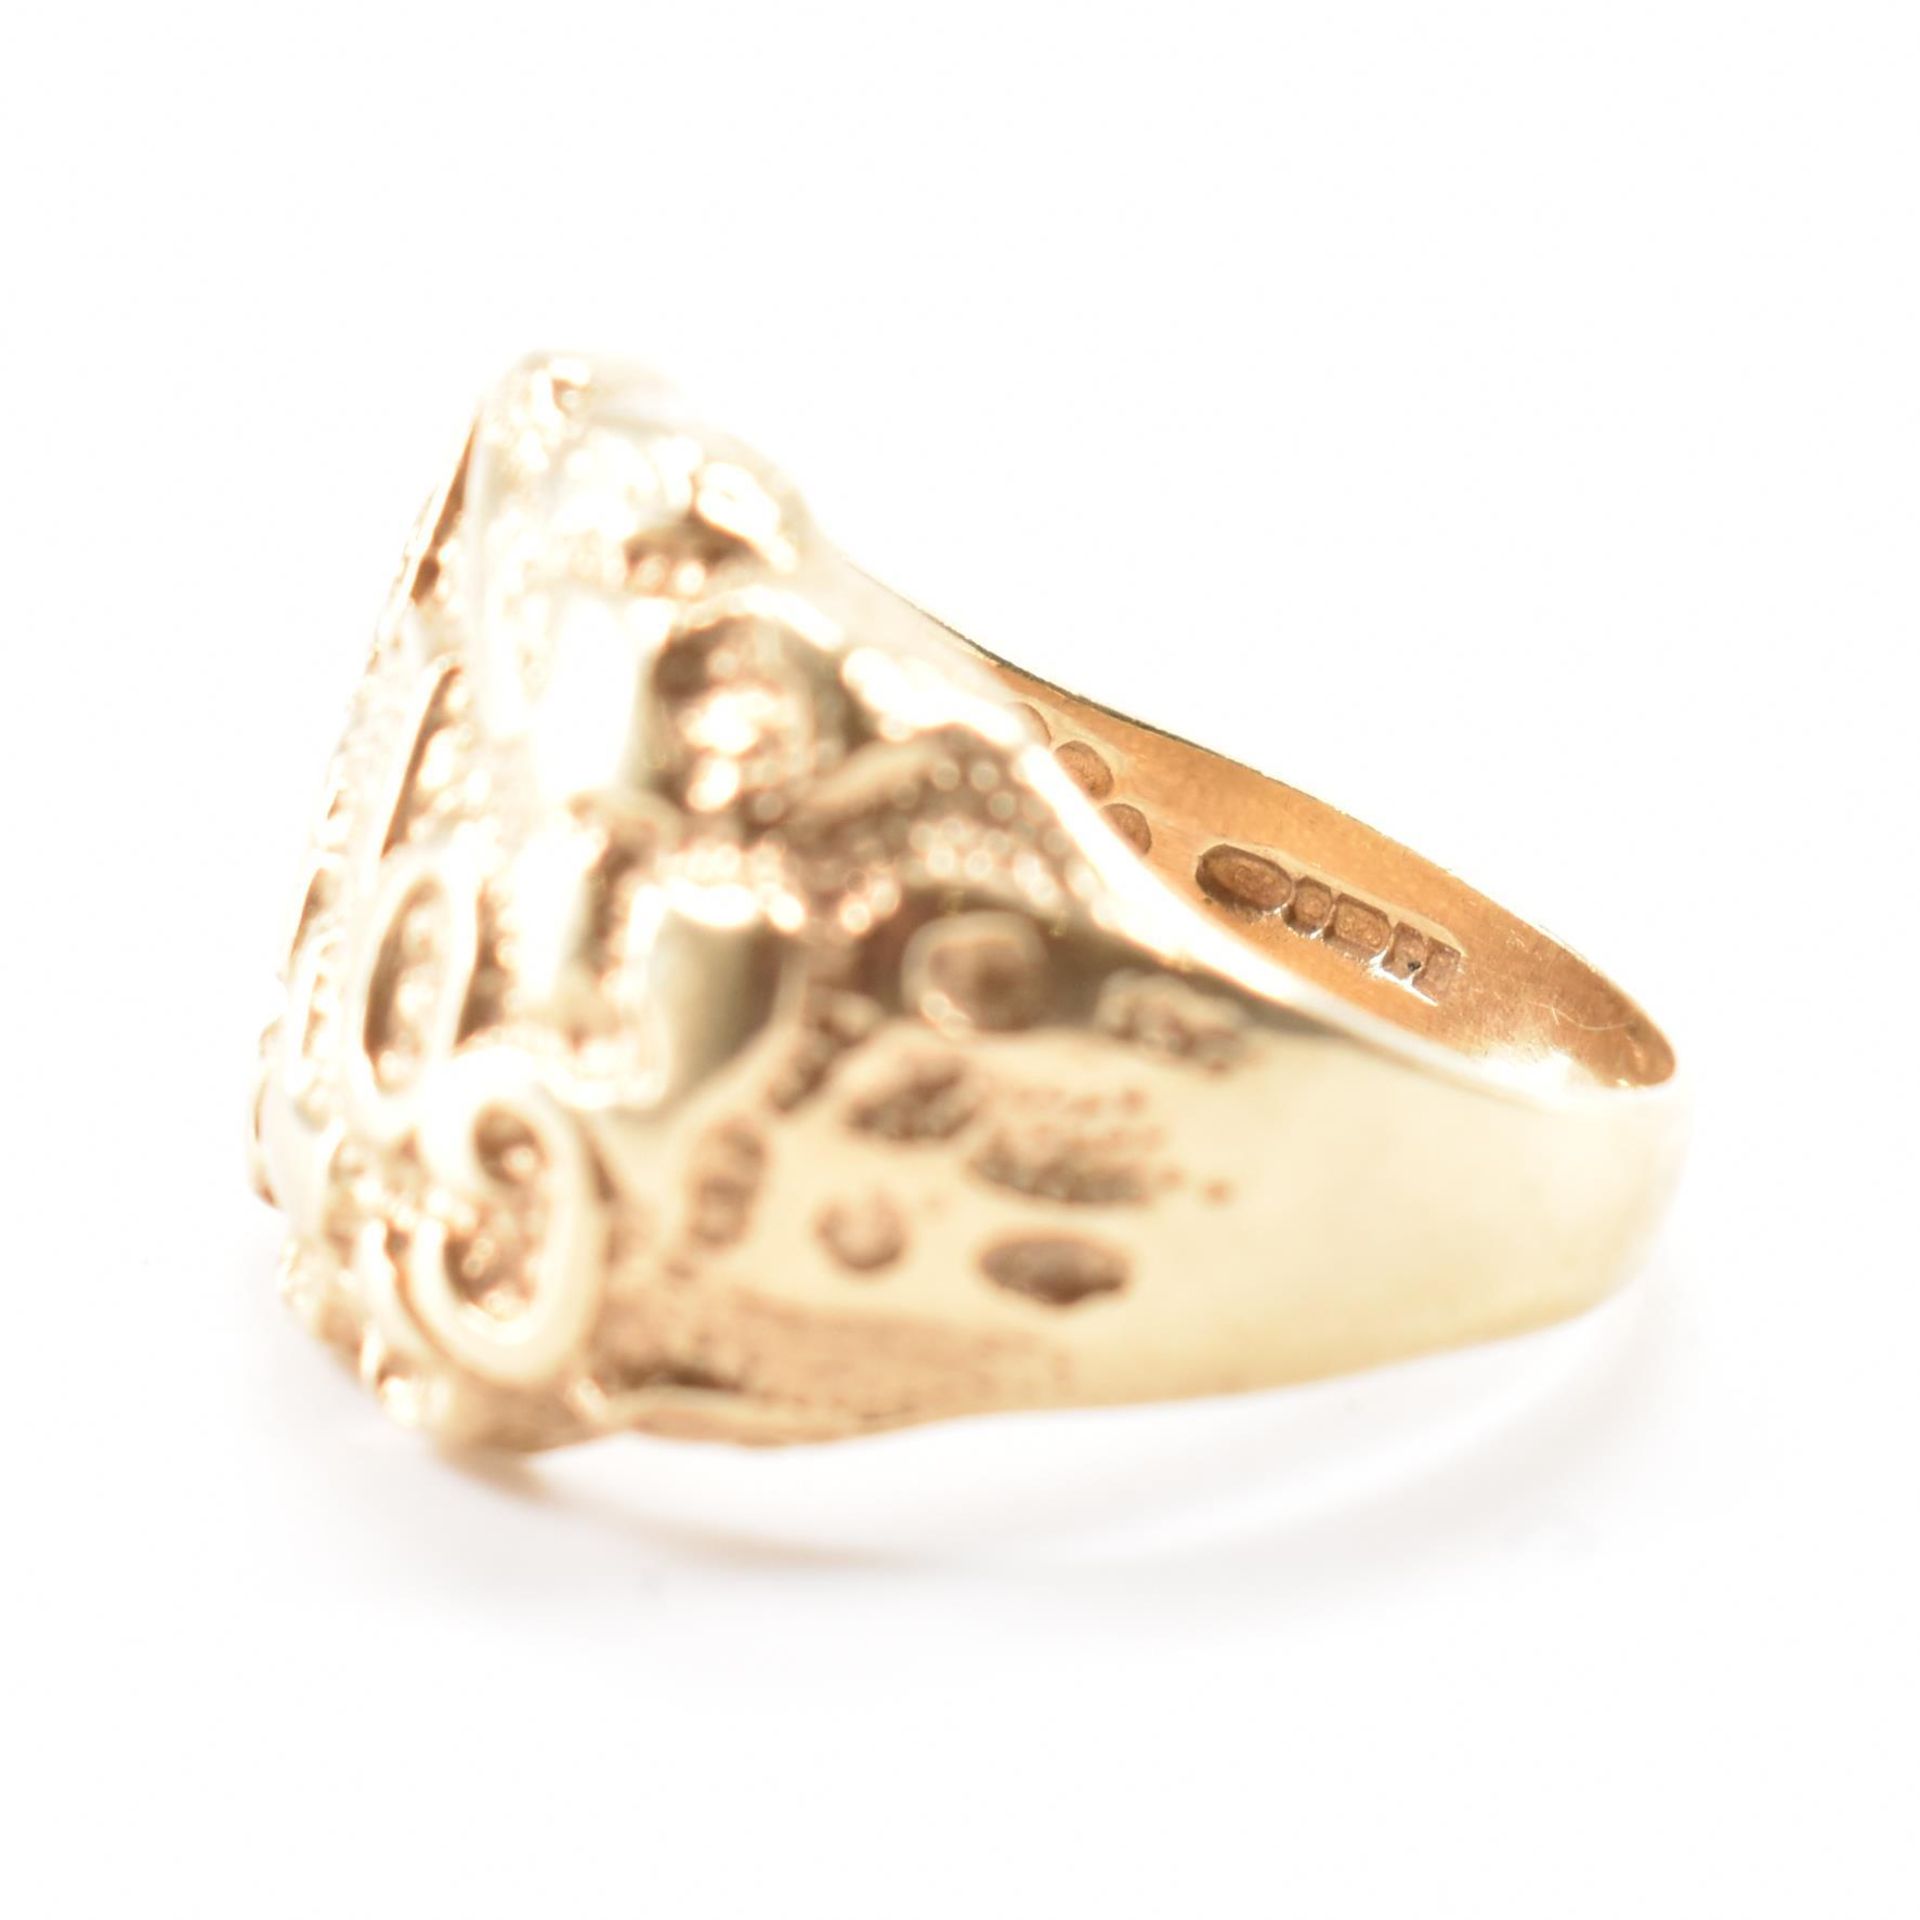 HALLMARKED 9CT GOLD NUGGET RING - Image 7 of 9